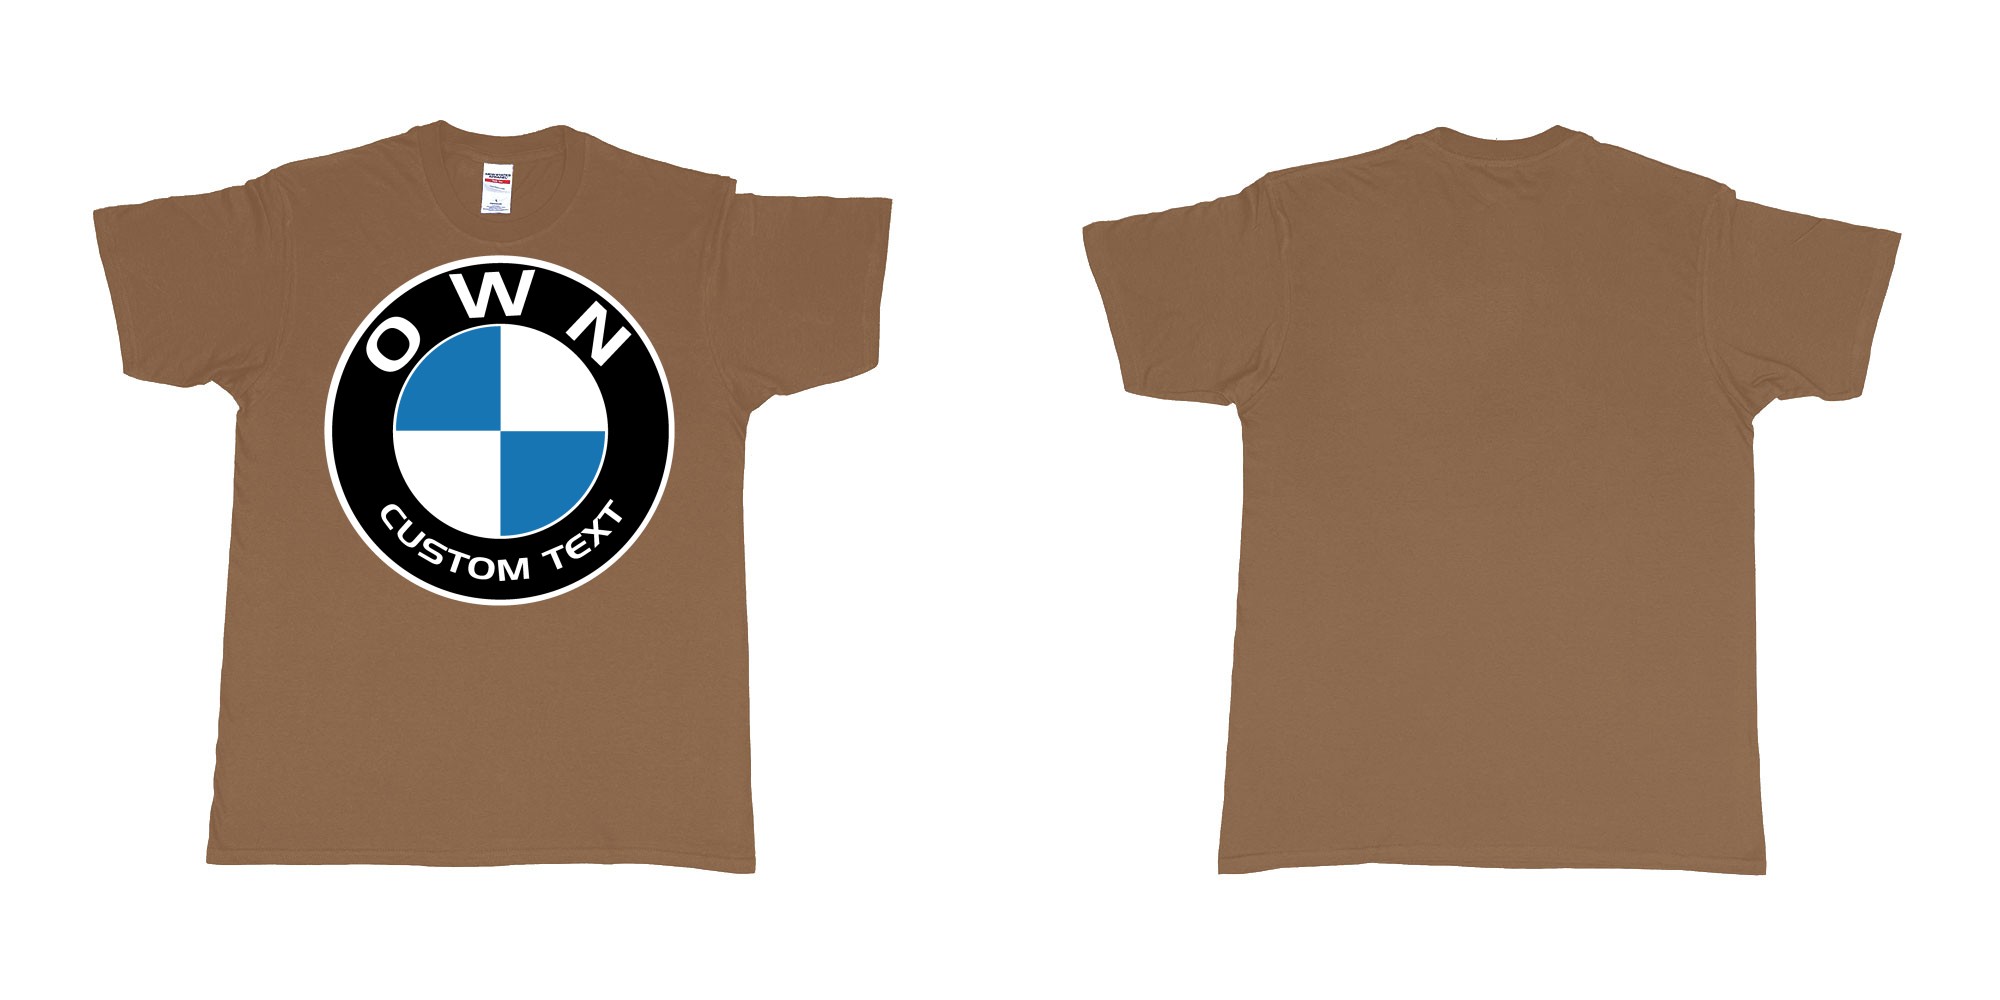 Custom tshirt design BMW logo custom text tshirt printing in fabric color chestnut choice your own text made in Bali by The Pirate Way